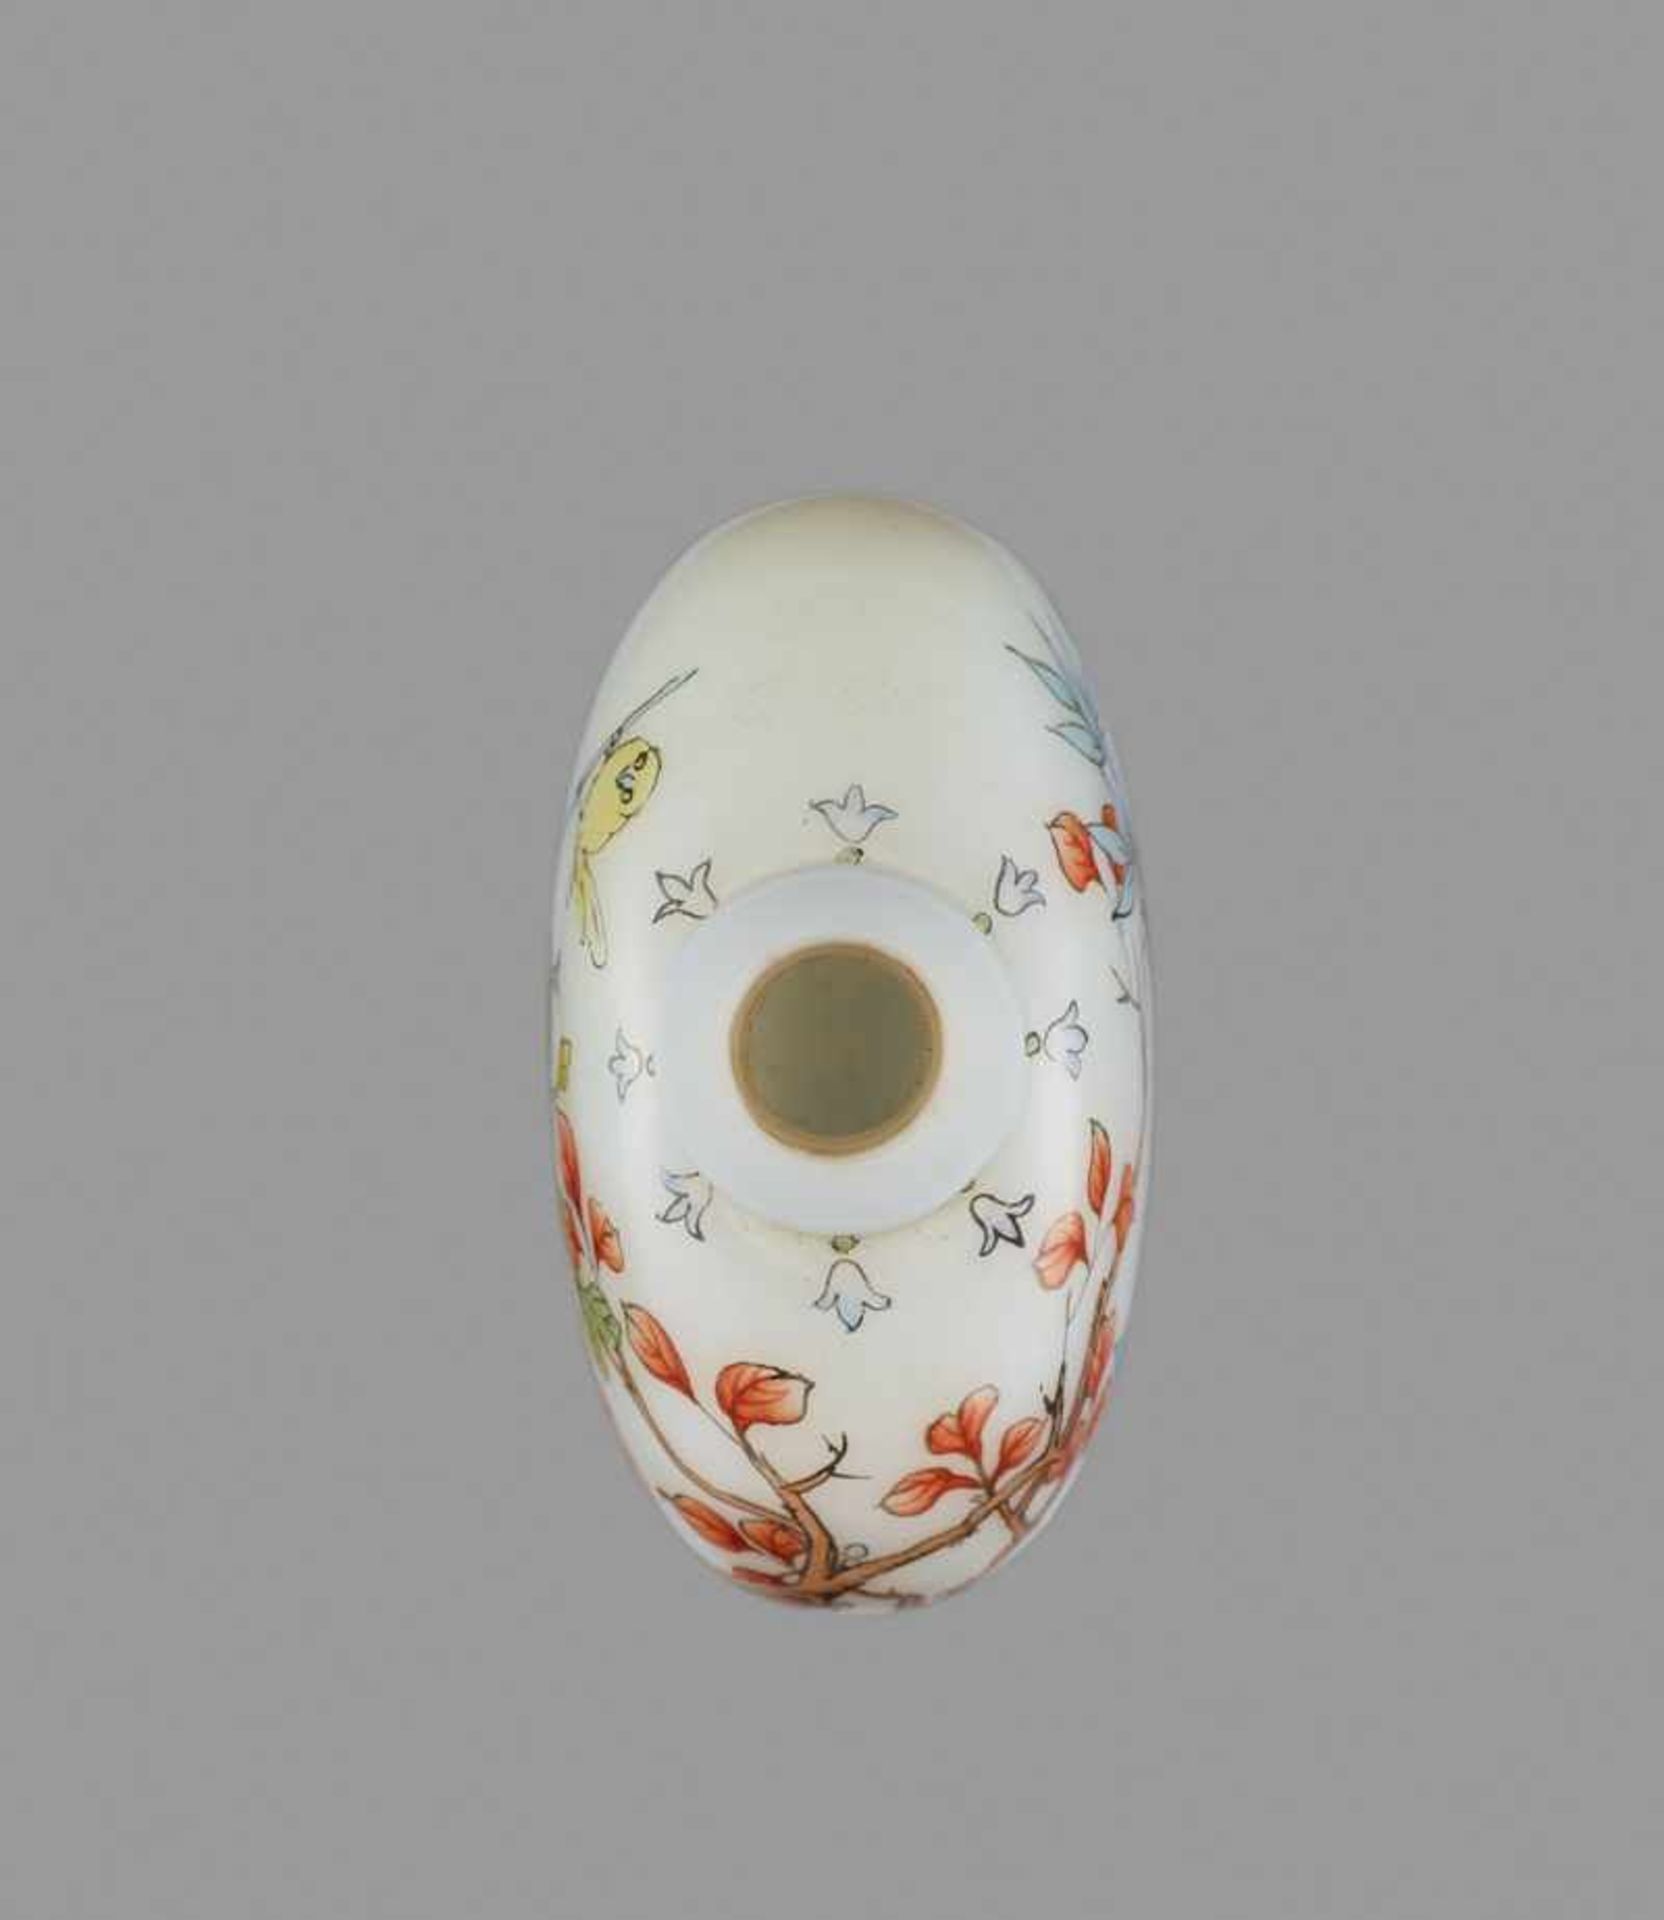 AN ENAMELED GLASS SNUFF BOTTLE, SCHOOL OF YE BENGQI Opaque white glass body with painted - Image 5 of 6